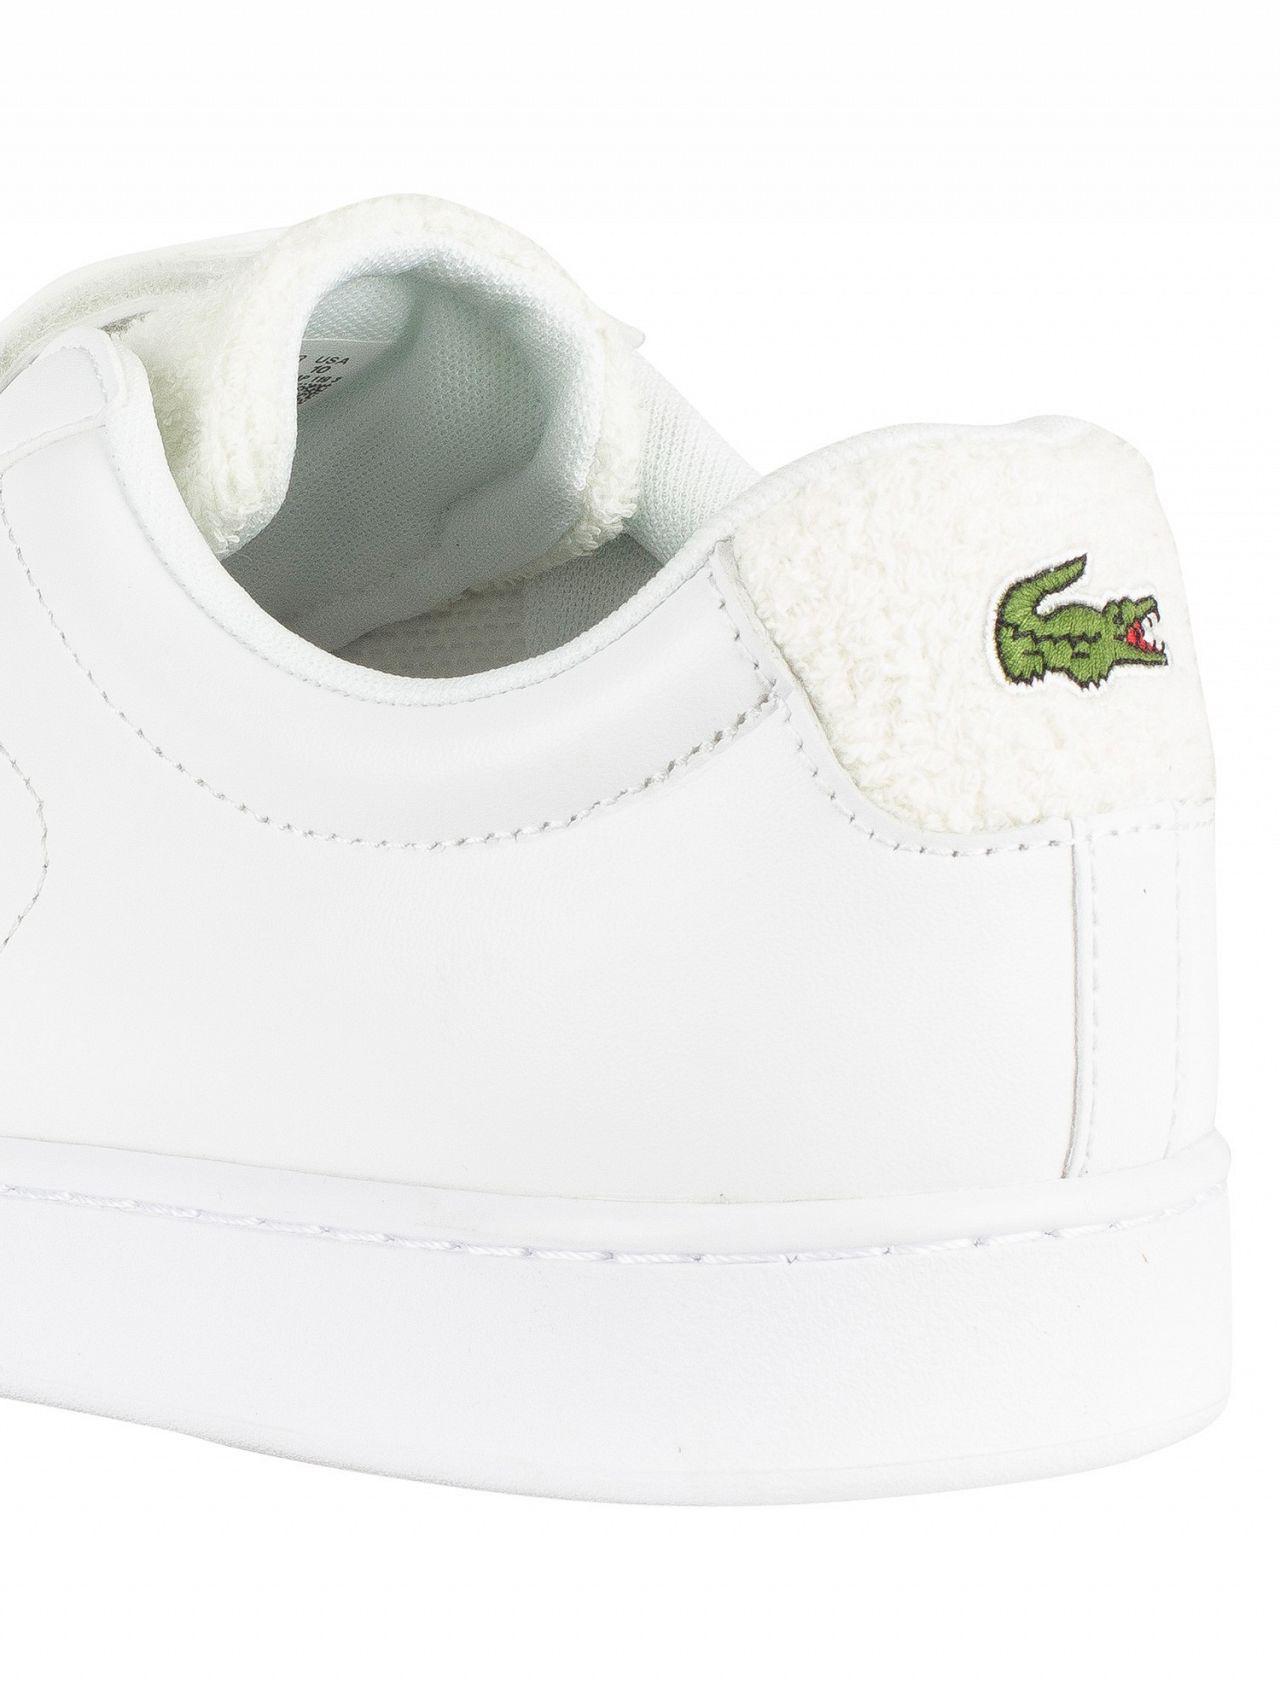 Lacoste White/off White Carnaby Evo Strap 119 3 Sma Leather Trainers for  Men | Lyst